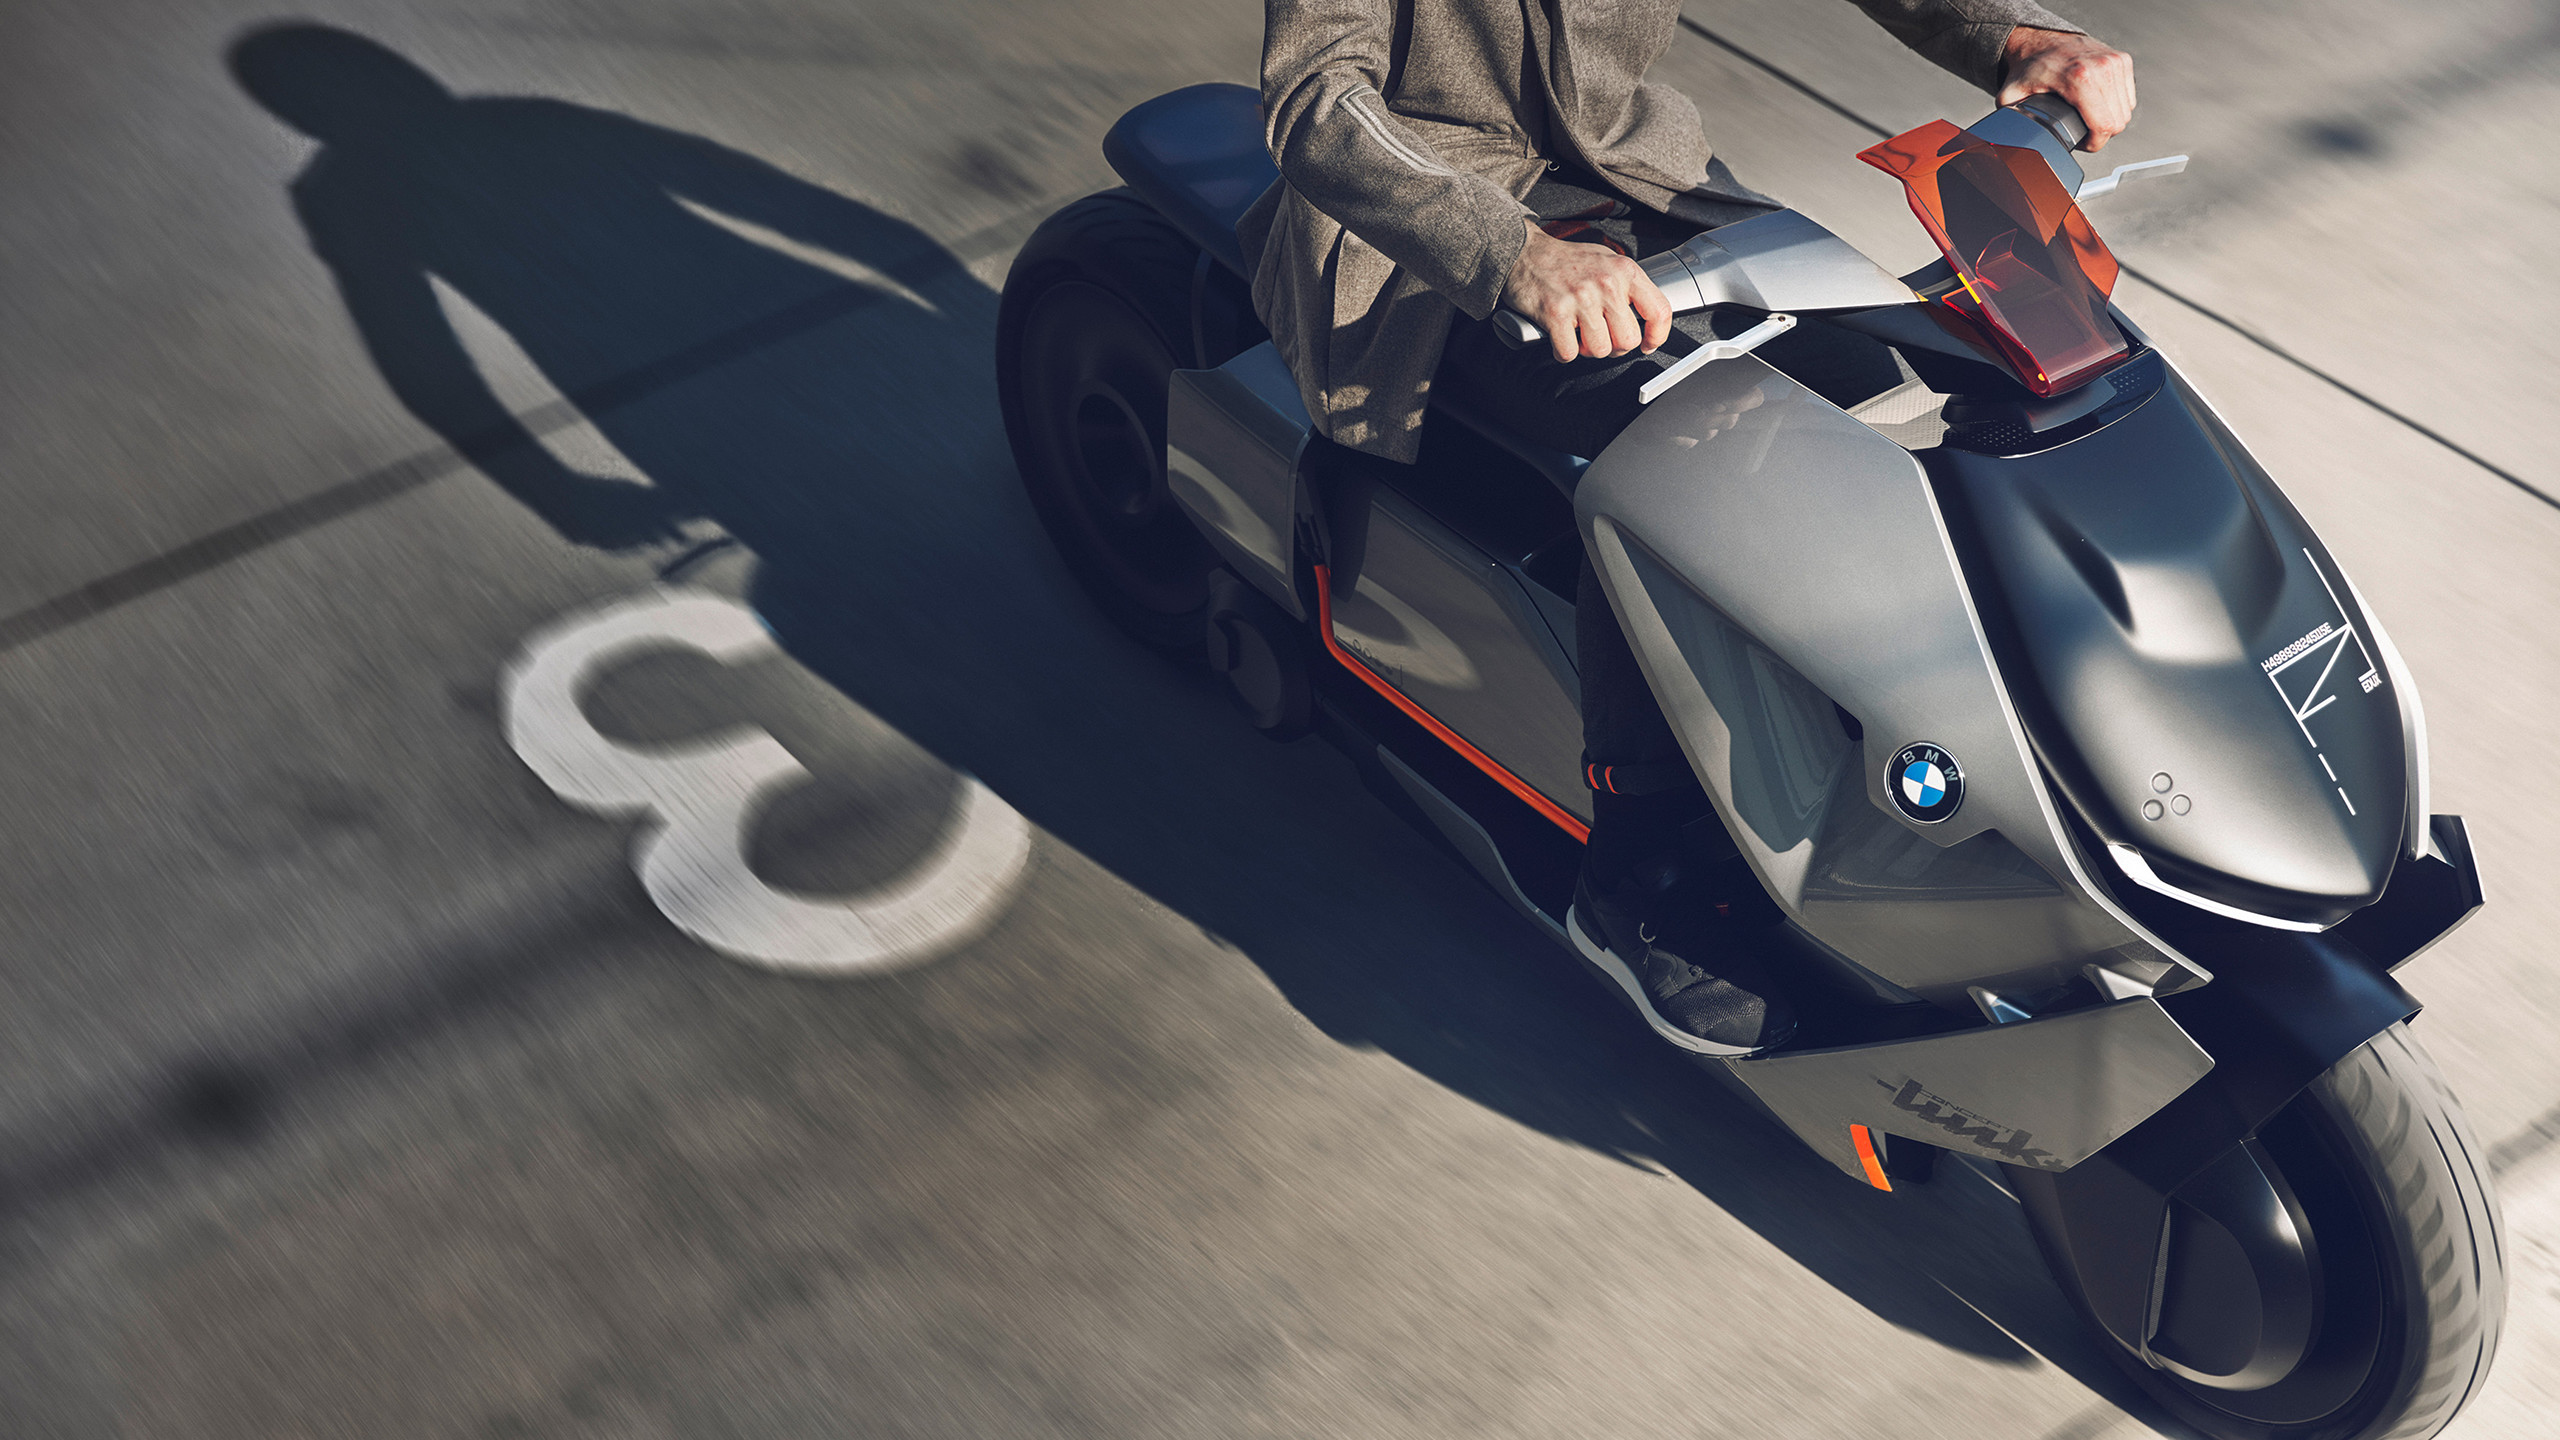 The BMW Motorrad Concept Link takes new, connected paths.